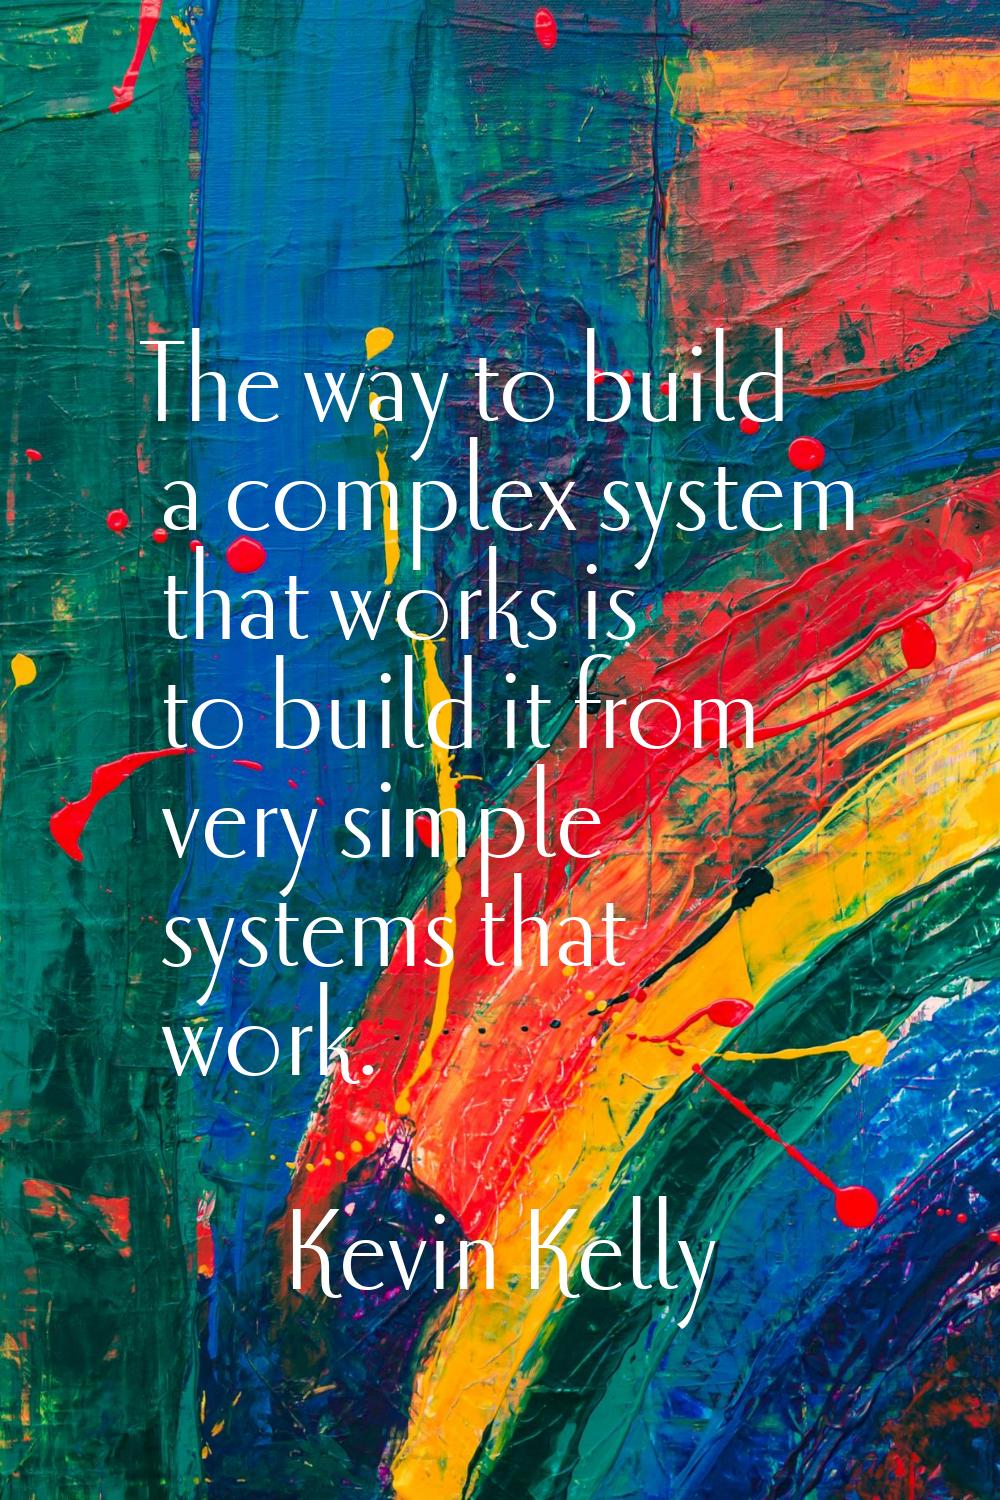 The way to build a complex system that works is to build it from very simple systems that work.